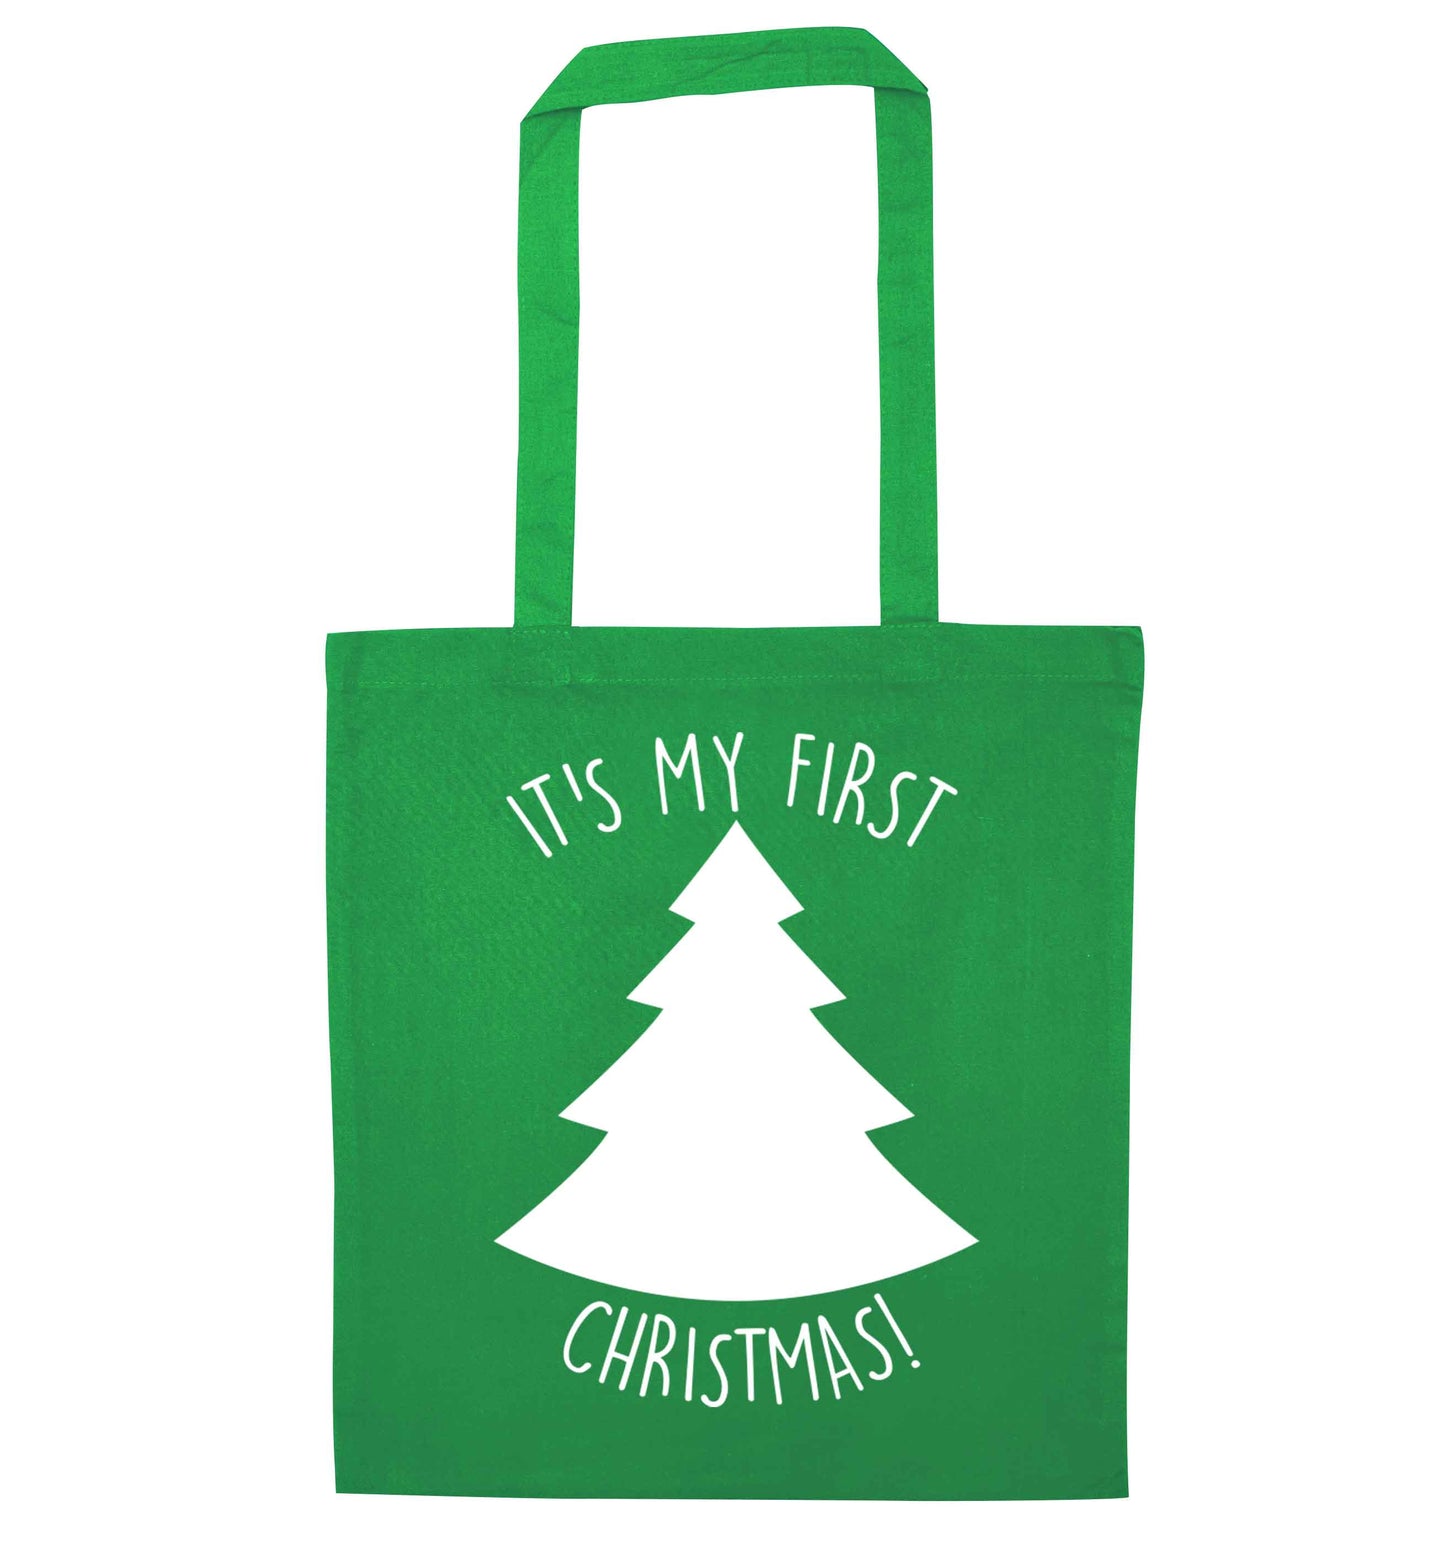 It's my first Christmas - tree green tote bag